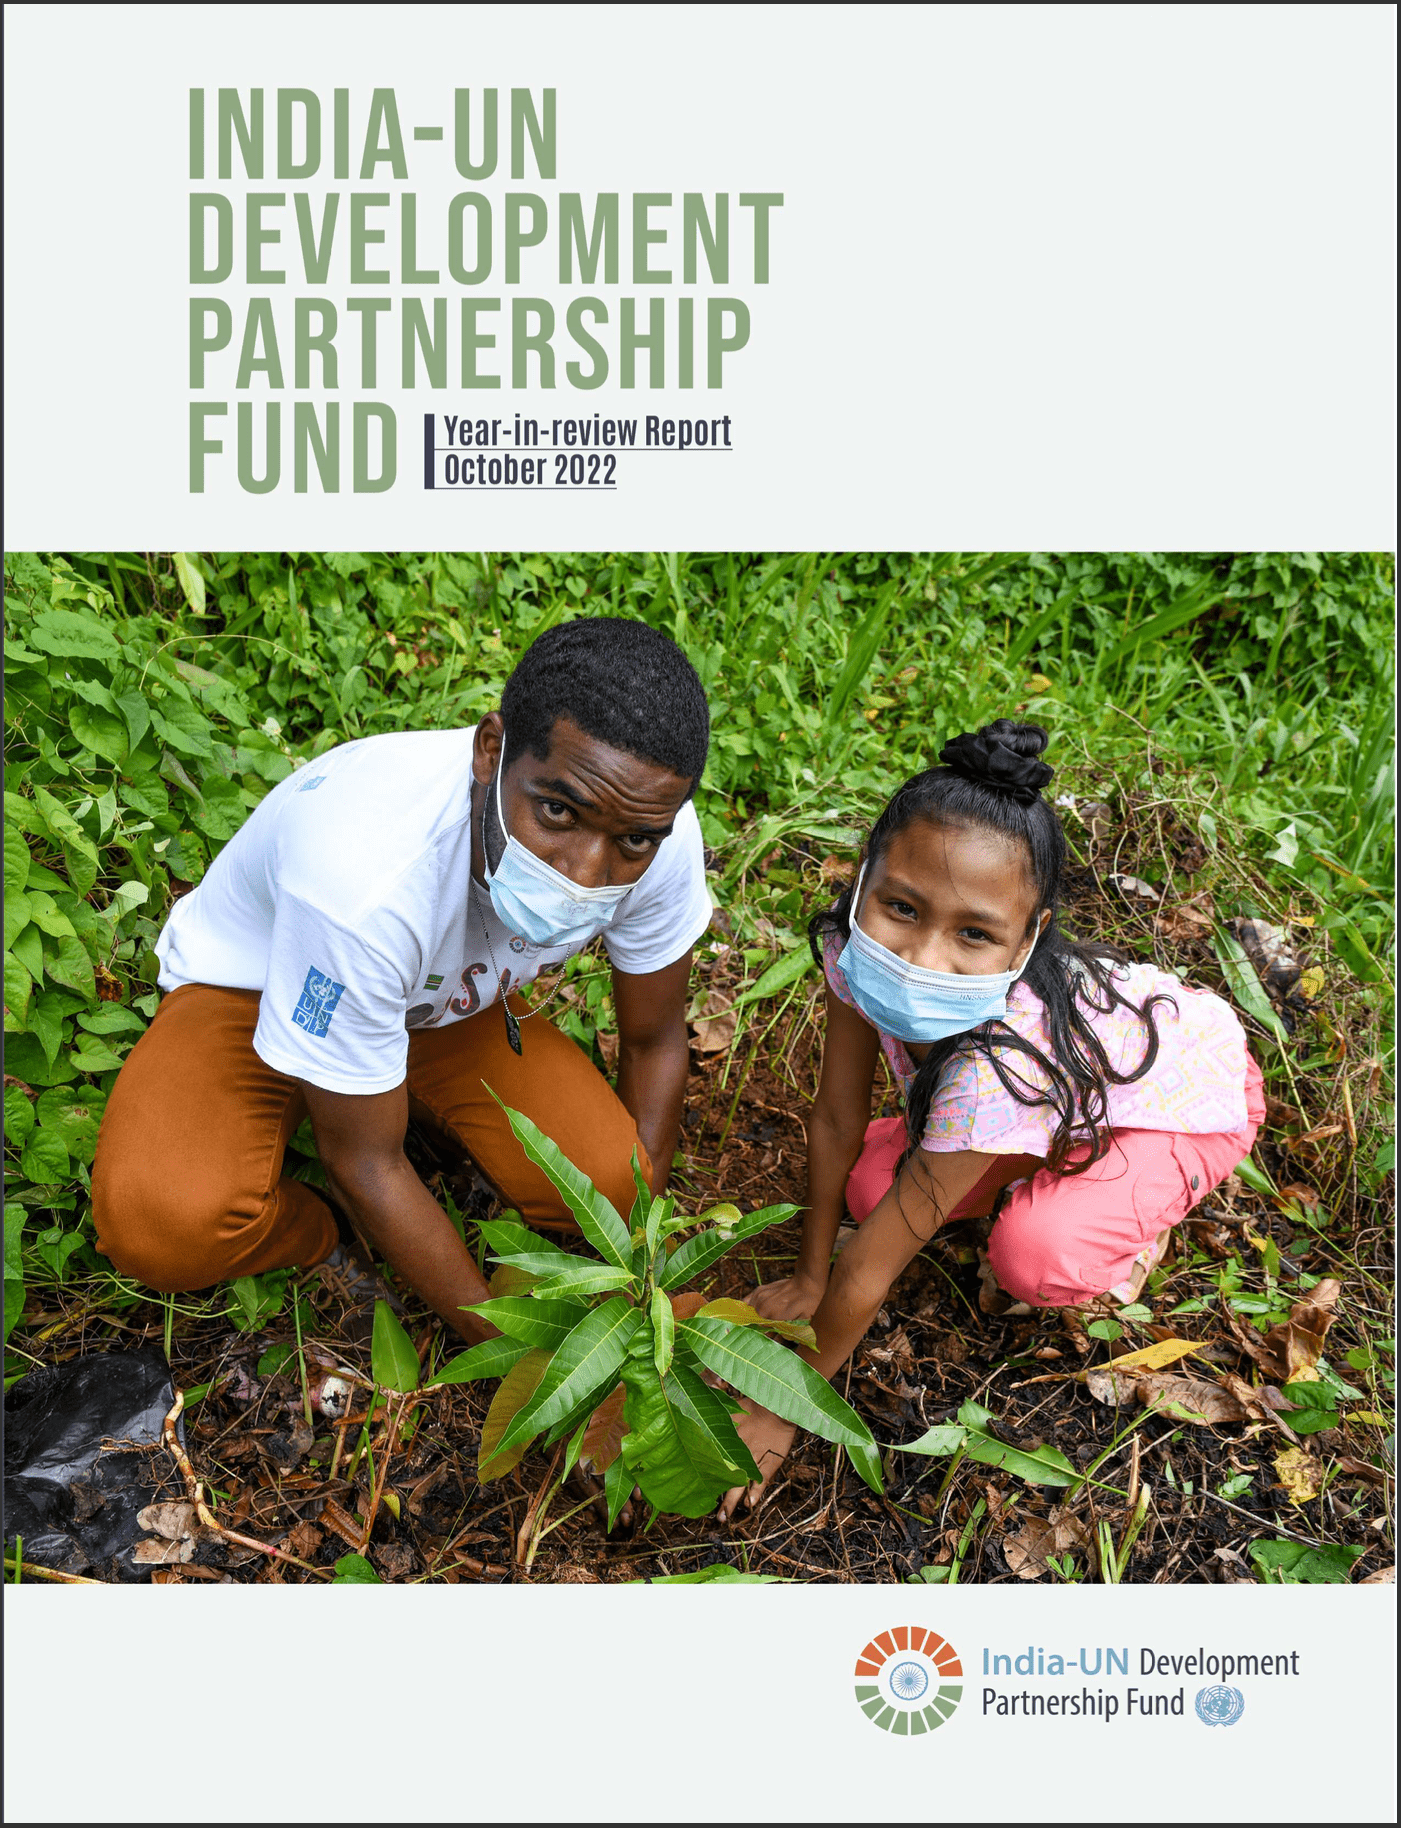 India-UN Development Partnership Fund Year-in-Review Report 2022